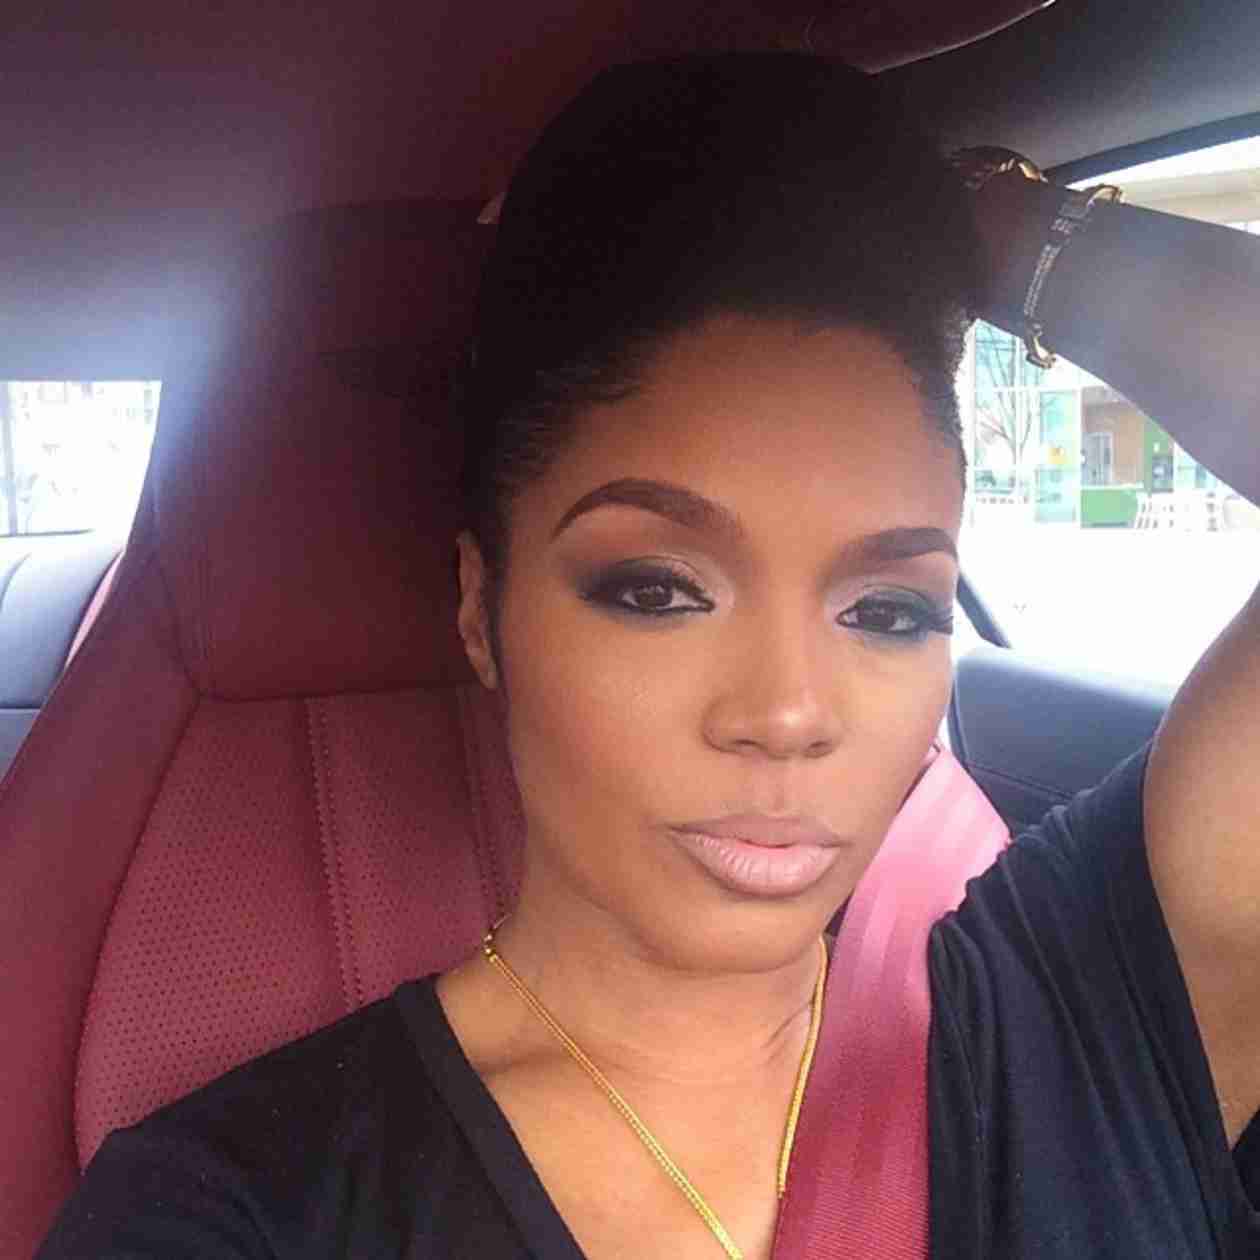 Rasheeda Frost Upsets Some Fans With Her Latest Photo